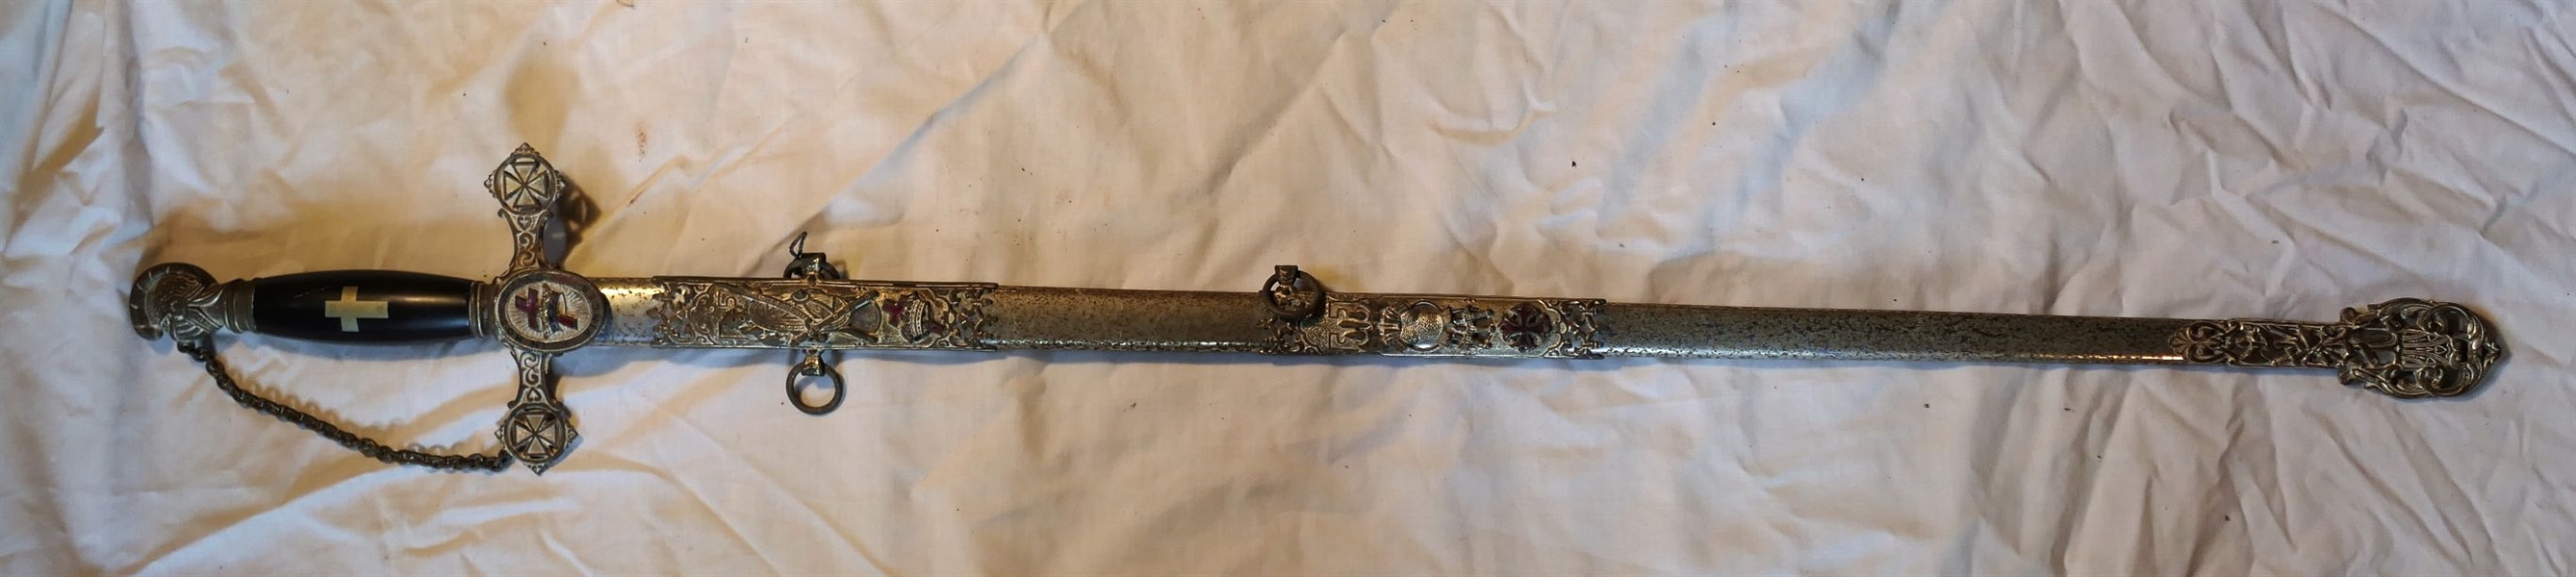 Highly Decorated Presentation Sword in Scabbard - Presented to D.F. Shockley  - Sword Made by Cincinnati Regalia Co. 